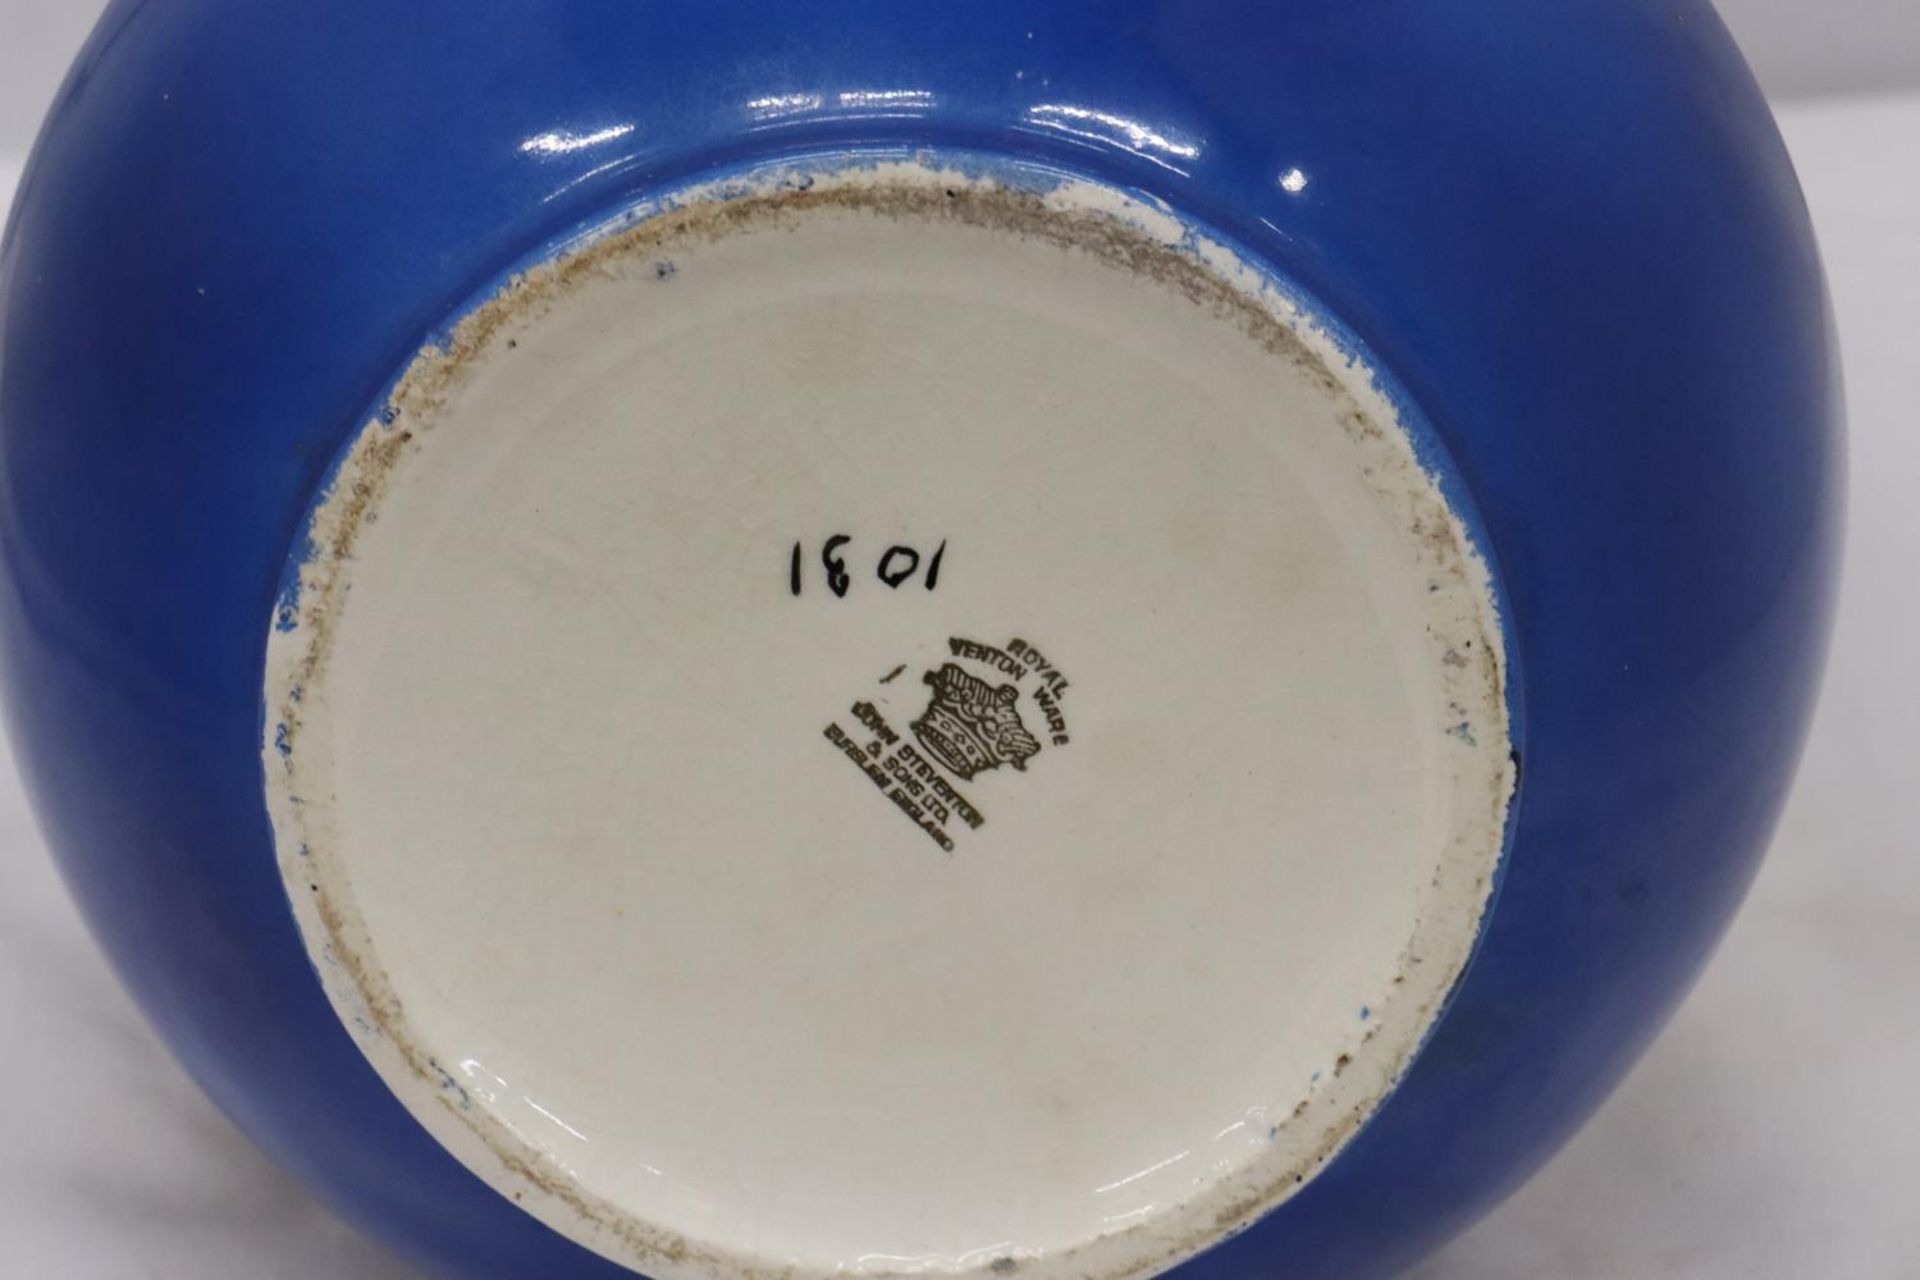 A LARGE ROYAL VENTON WARE (1930'S) JUG WITH KINGFISHER DESIGN - Image 6 of 6